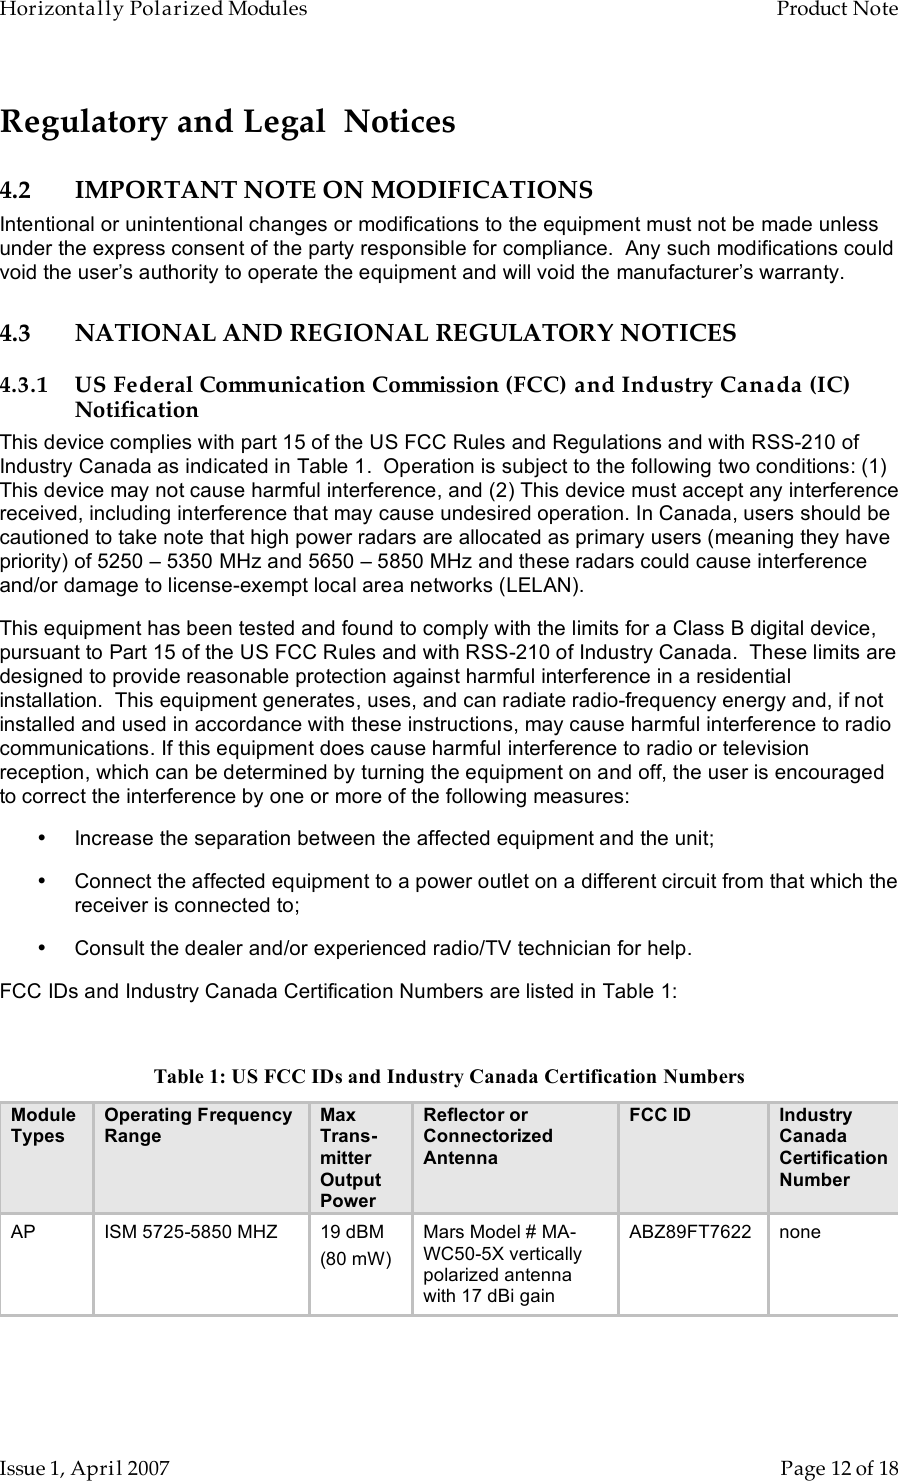 Horizontally Polarized Modules    Product Note   Issue 1, April 2007      Page 12 of 18 Regulatory and Legal  Notices 4.2 IMPORTANT NOTE ON MODIFICATIONS Intentional or unintentional changes or modifications to the equipment must not be made unless under the express consent of the party responsible for compliance.  Any such modifications could void the user’s authority to operate the equipment and will void the manufacturer’s warranty. 4.3 NATIONAL AND REGIONAL REGULATORY NOTICES 4.3.1 US Federal Communication Commission (FCC) and Industry Canada (IC) Notification This device complies with part 15 of the US FCC Rules and Regulations and with RSS-210 of Industry Canada as indicated in Table 1.  Operation is subject to the following two conditions: (1) This device may not cause harmful interference, and (2) This device must accept any interference received, including interference that may cause undesired operation. In Canada, users should be cautioned to take note that high power radars are allocated as primary users (meaning they have priority) of 5250 – 5350 MHz and 5650 – 5850 MHz and these radars could cause interference and/or damage to license-exempt local area networks (LELAN). This equipment has been tested and found to comply with the limits for a Class B digital device, pursuant to Part 15 of the US FCC Rules and with RSS-210 of Industry Canada.  These limits are designed to provide reasonable protection against harmful interference in a residential installation.  This equipment generates, uses, and can radiate radio-frequency energy and, if not installed and used in accordance with these instructions, may cause harmful interference to radio communications. If this equipment does cause harmful interference to radio or television reception, which can be determined by turning the equipment on and off, the user is encouraged to correct the interference by one or more of the following measures: •  Increase the separation between the affected equipment and the unit; •  Connect the affected equipment to a power outlet on a different circuit from that which the receiver is connected to; •  Consult the dealer and/or experienced radio/TV technician for help. FCC IDs and Industry Canada Certification Numbers are listed in Table 1:  Table 1: US FCC IDs and Industry Canada Certification Numbers Module Types Operating Frequency Range Max Trans-mitter Output Power Reflector or Connectorized Antenna FCC ID Industry Canada Certification Number AP ISM 5725-5850 MHZ 19 dBM (80 mW) Mars Model # MA-WC50-5X vertically polarized antenna with 17 dBi gain ABZ89FT7622 none  